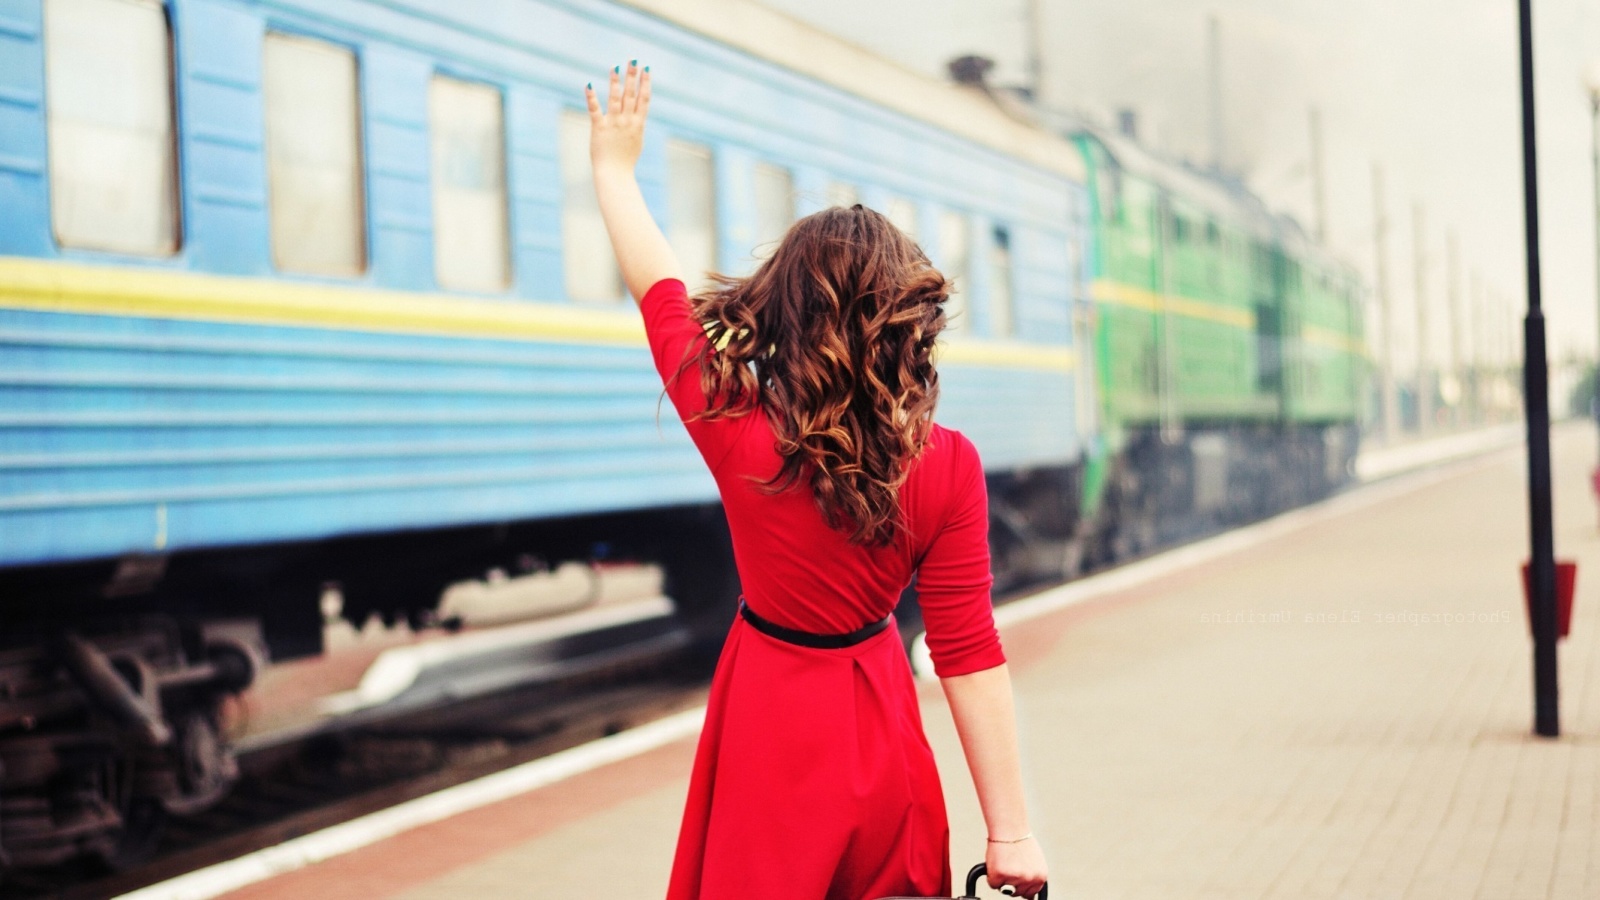 Girl traveling from train station wallpaper 1600x900